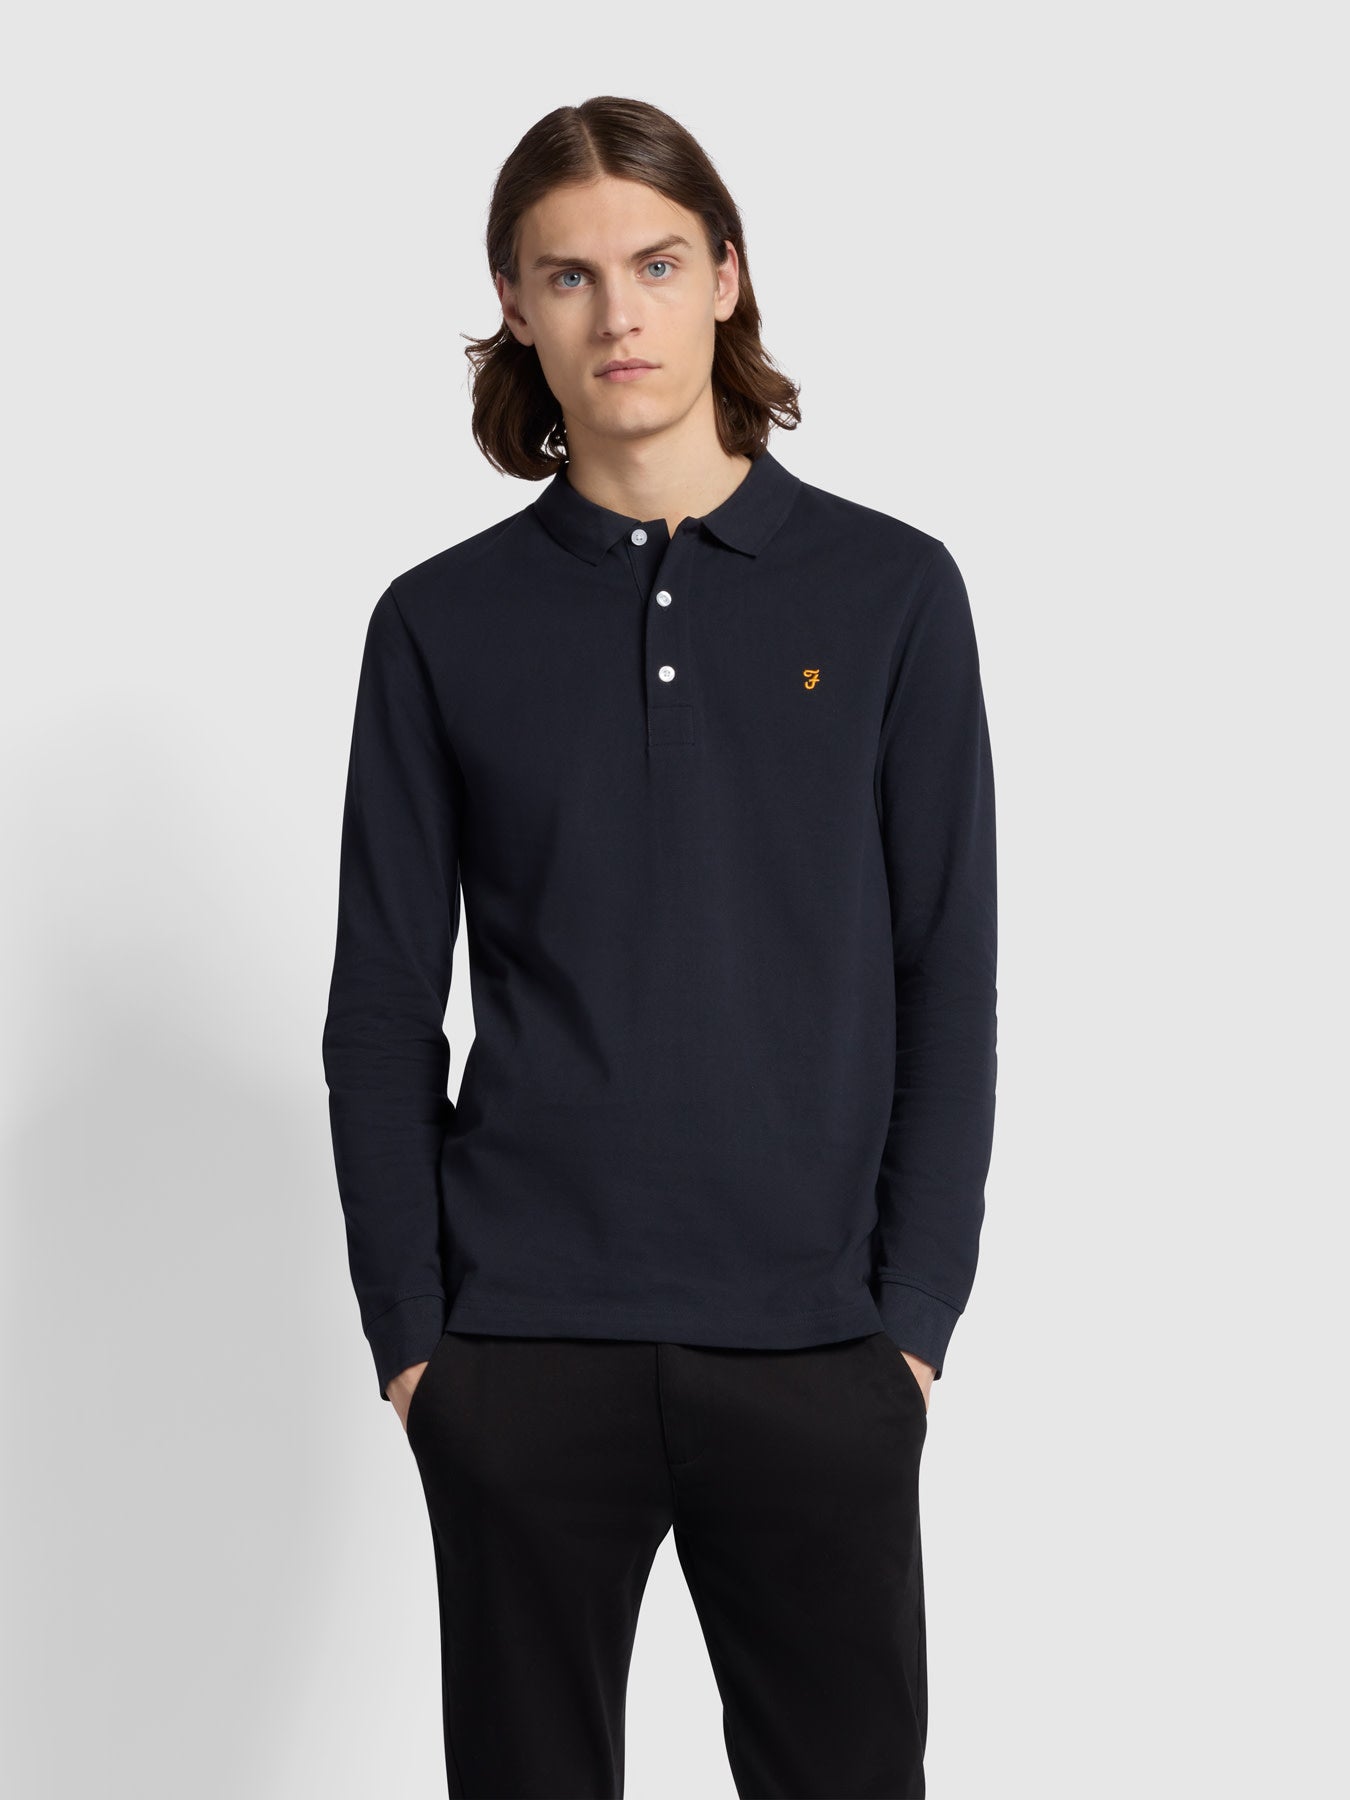 View Blanes Organic Cotton Long Sleeve Polo Shirt In True Navy information